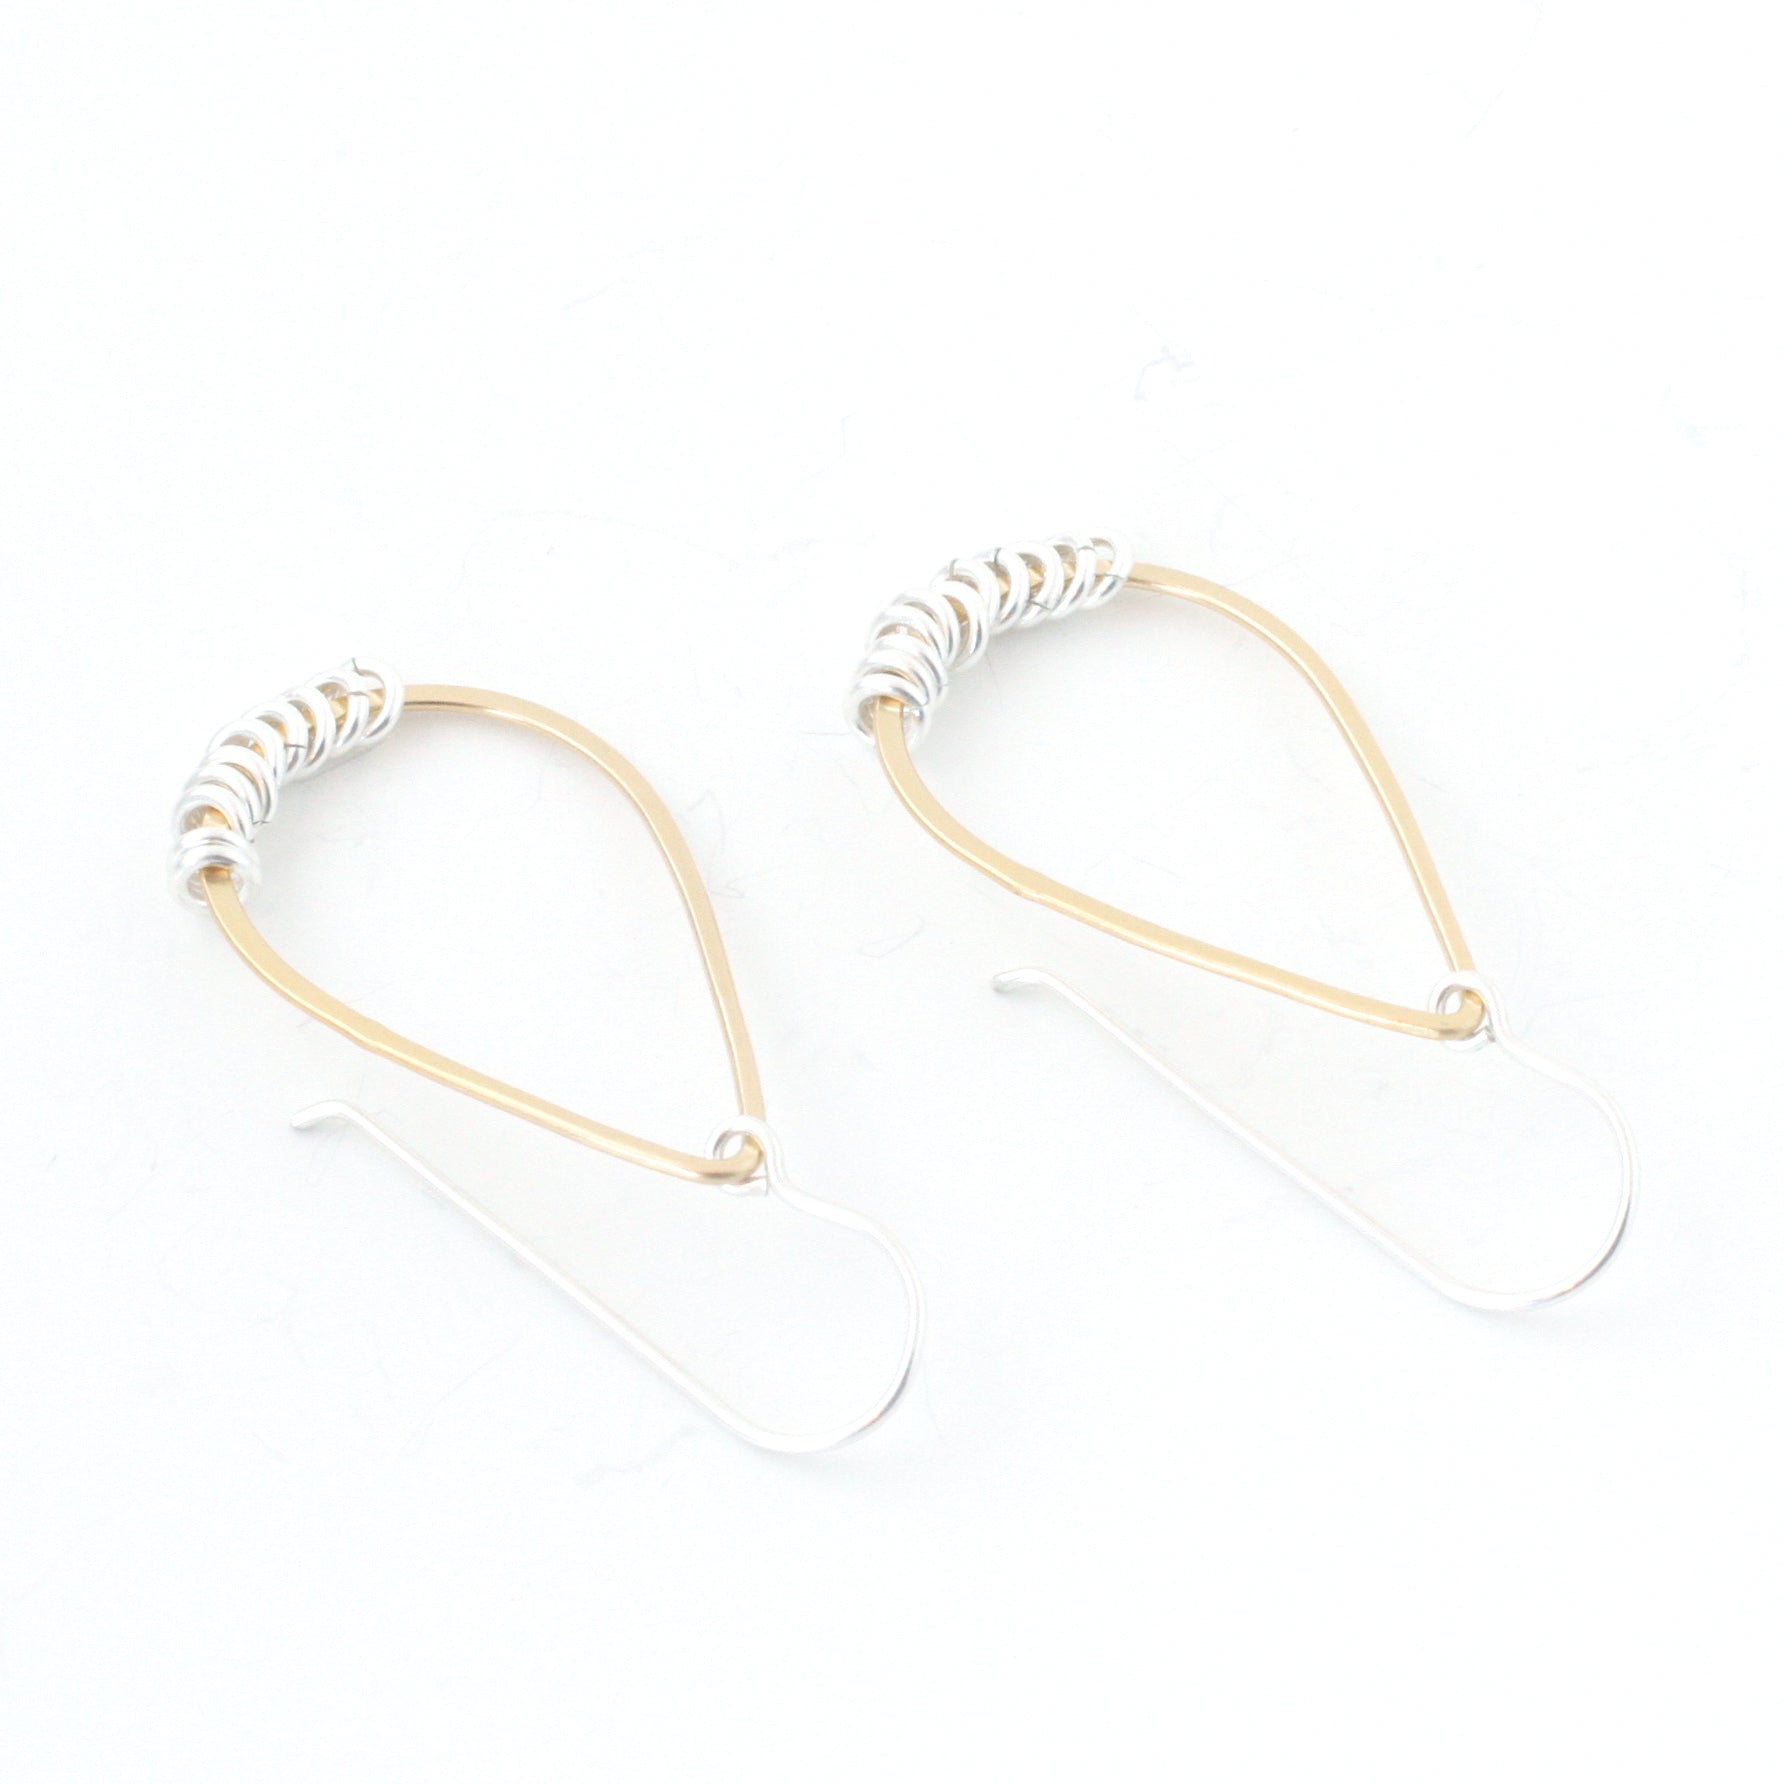 Suspended Earrings (Gold-Filled)